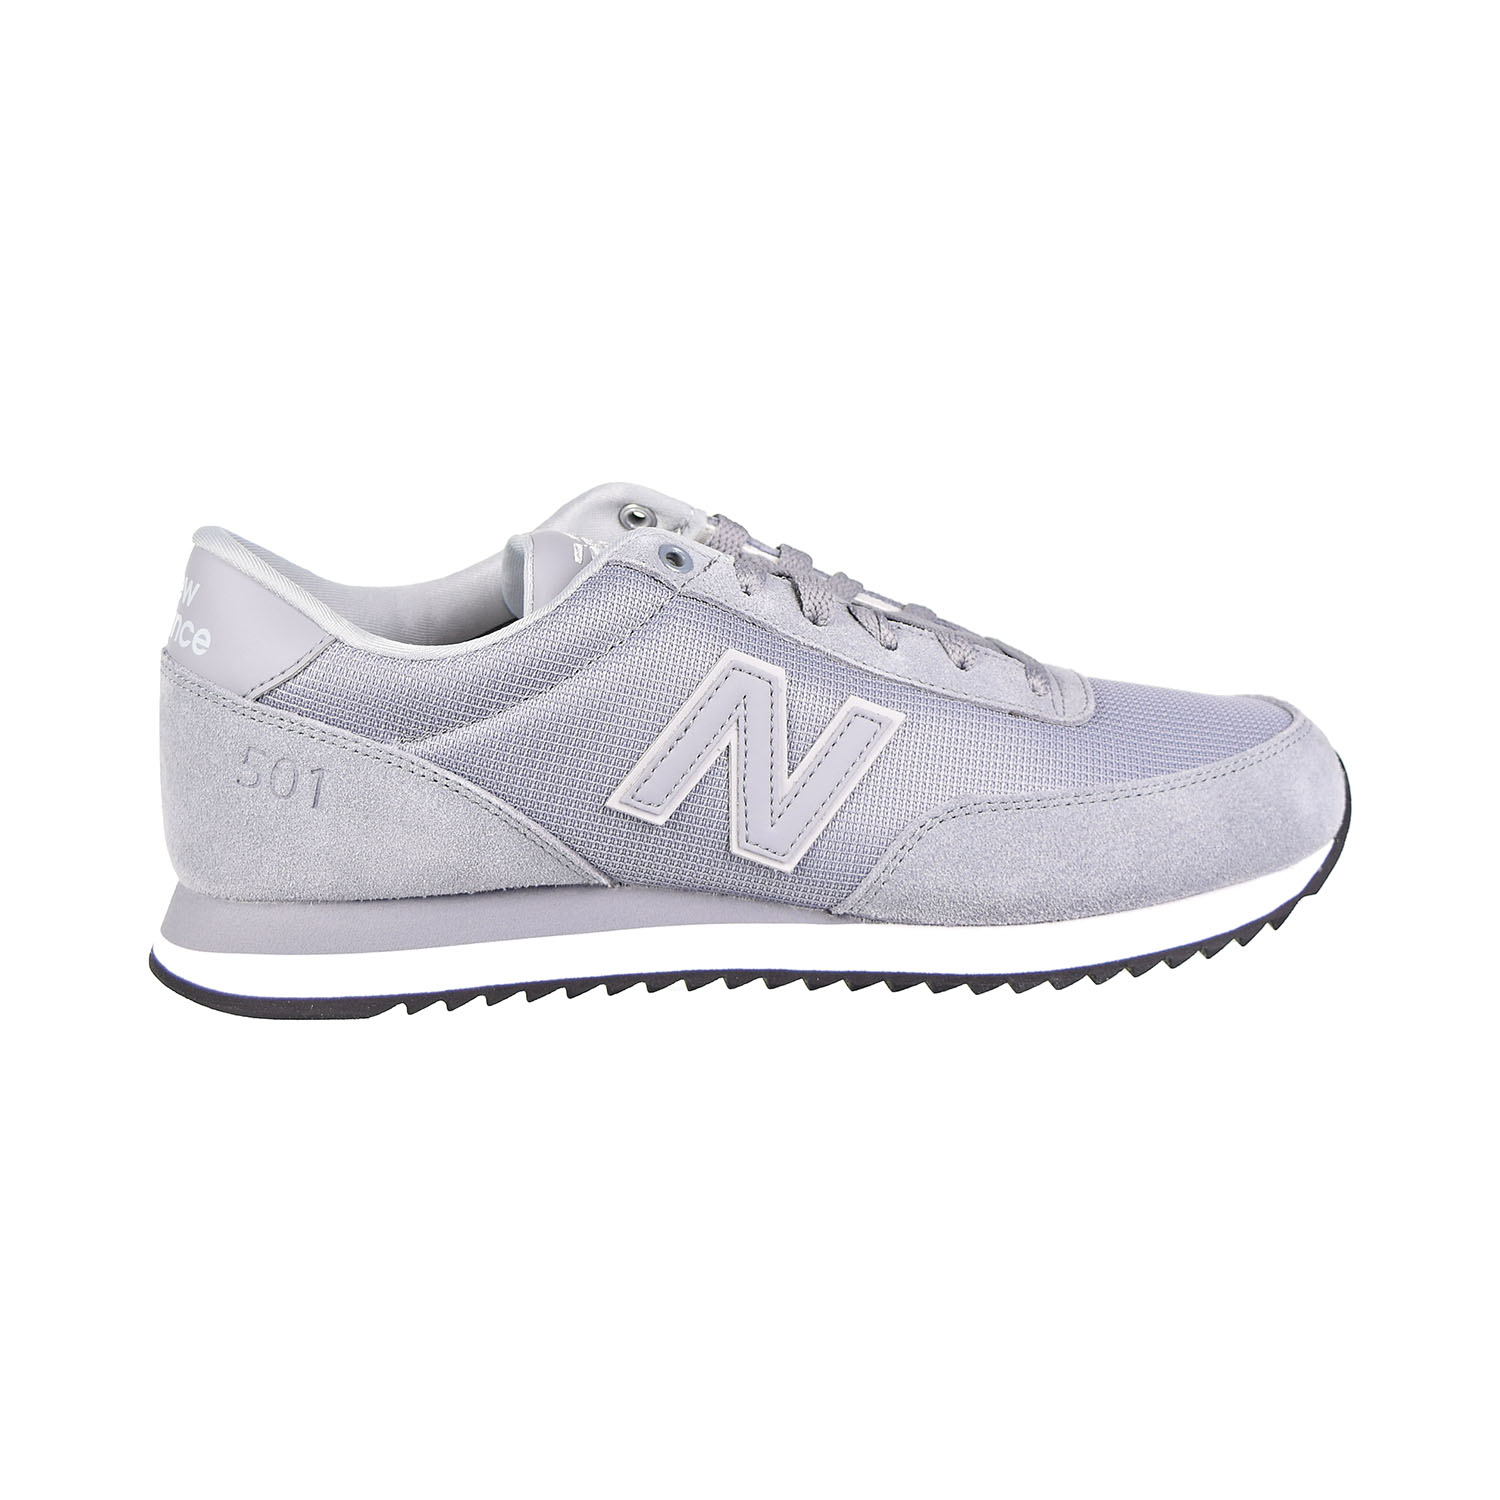 men's new balance 501 leather casual shoes